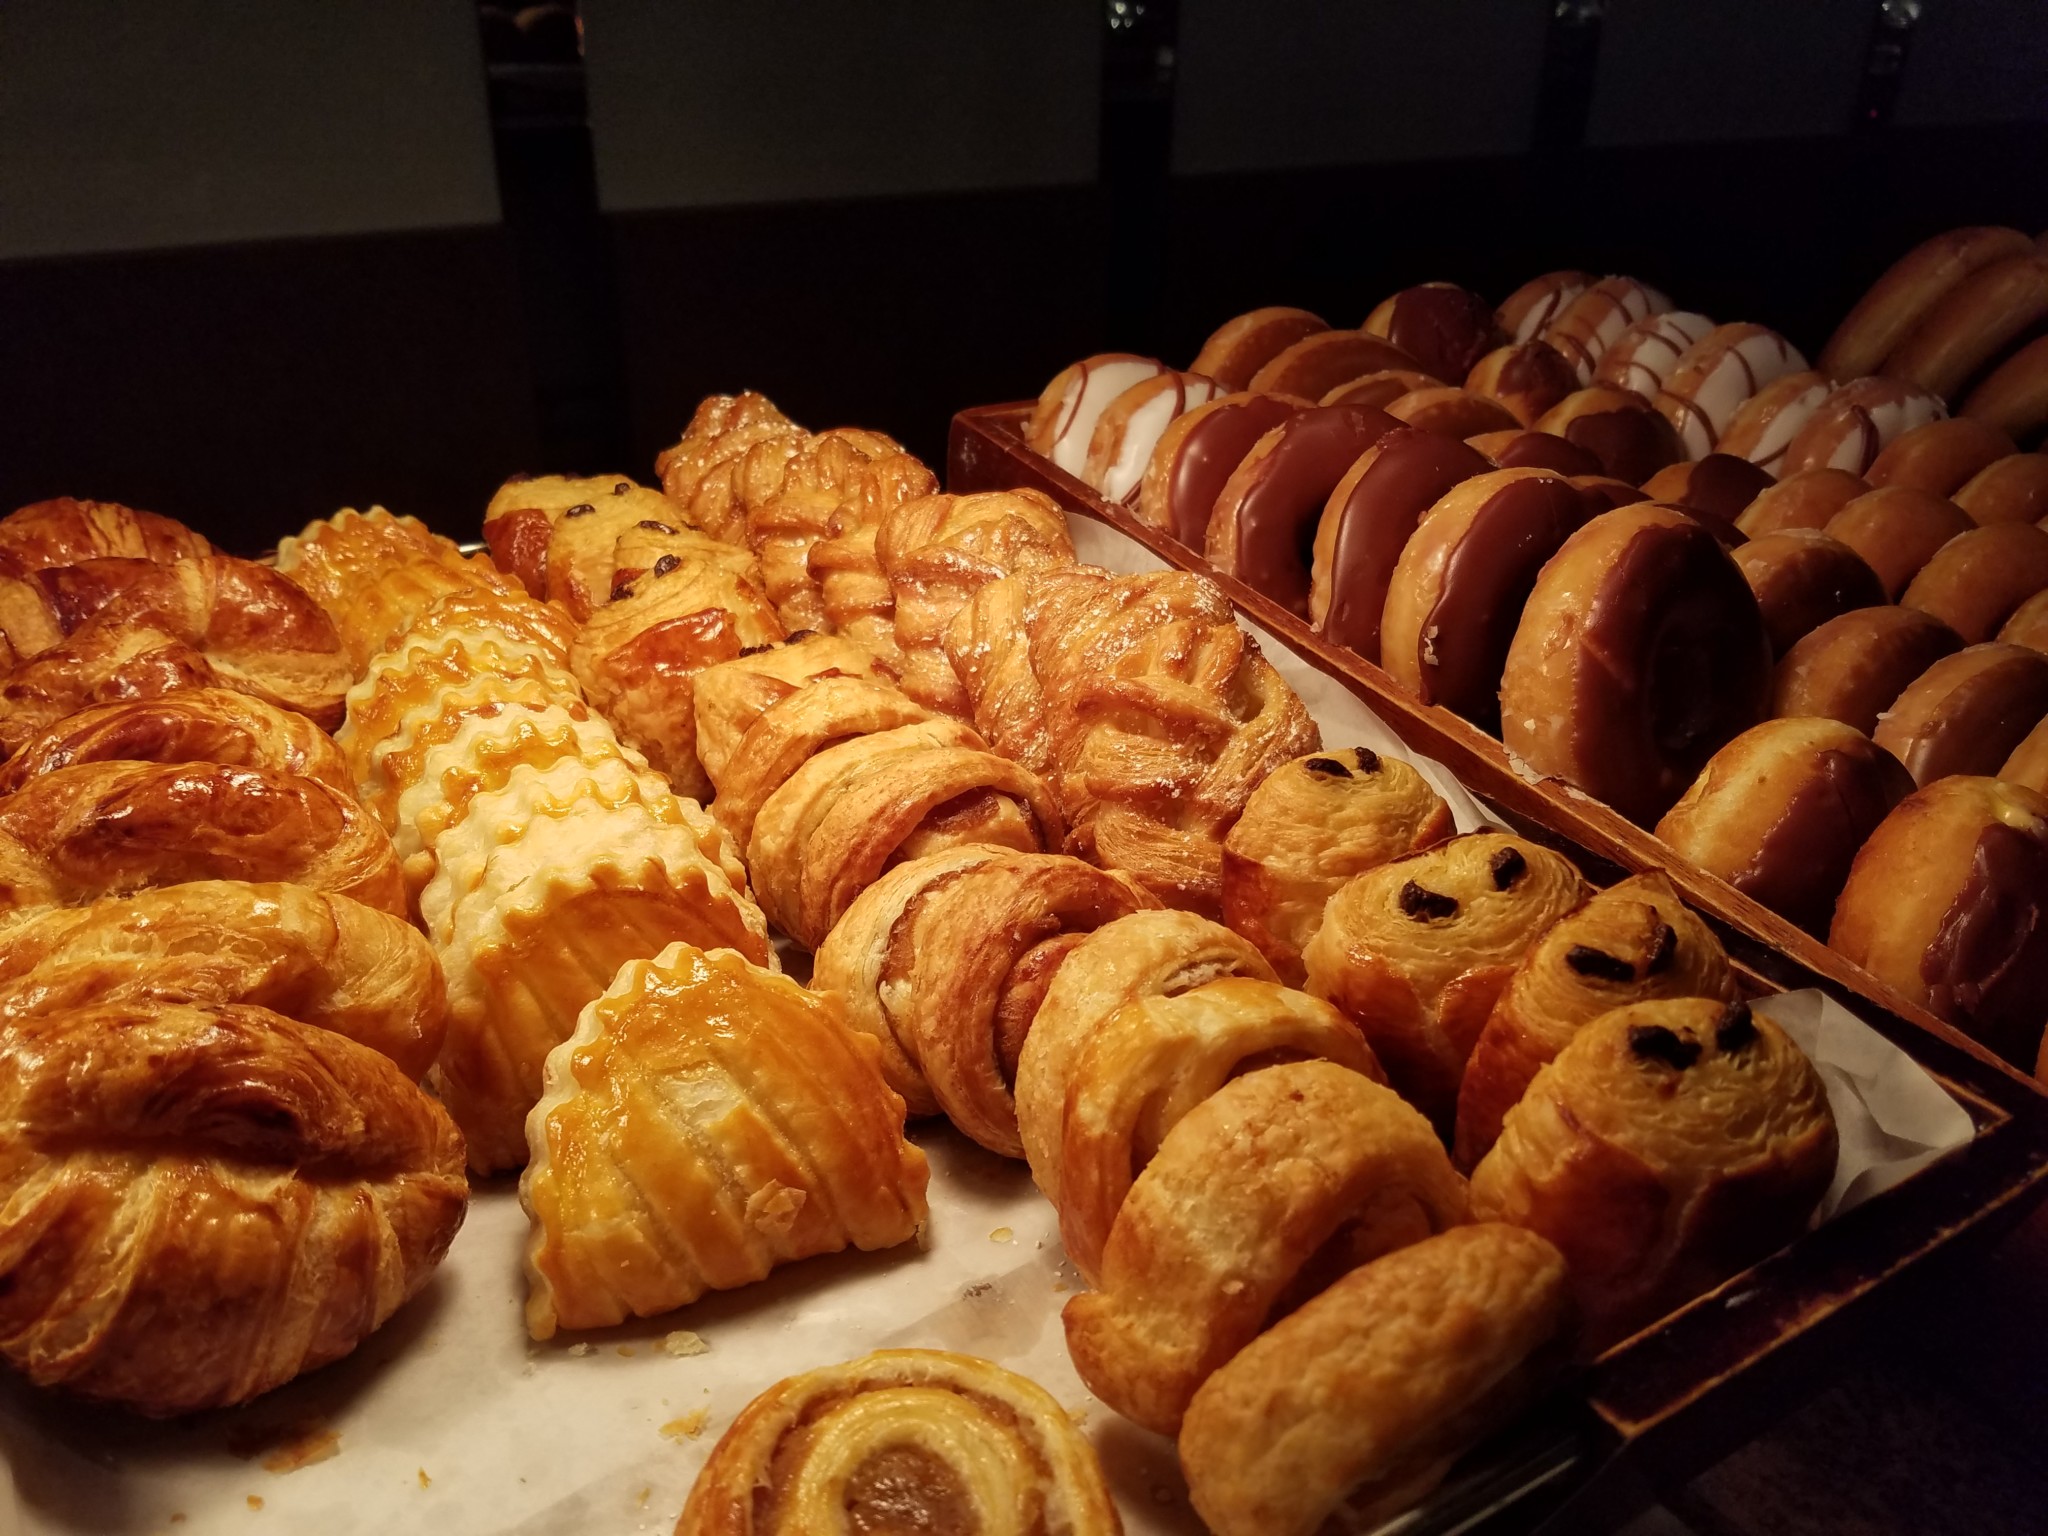 The pastries 